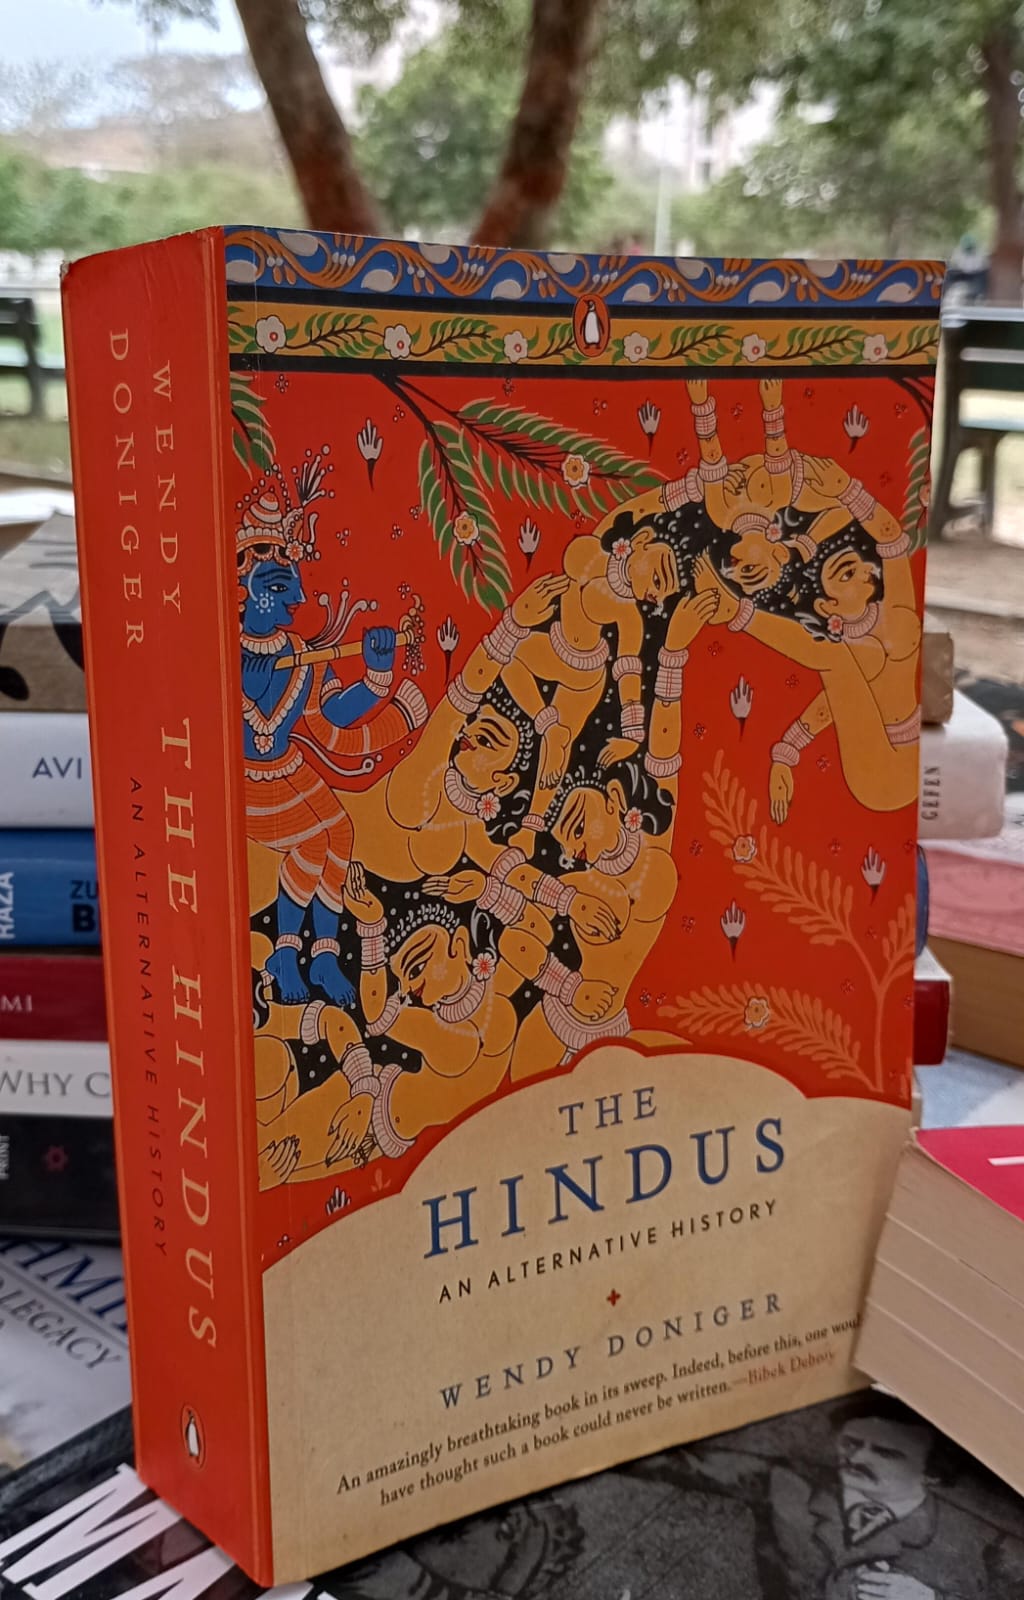 the hindus an alternative history by wendy doniger.